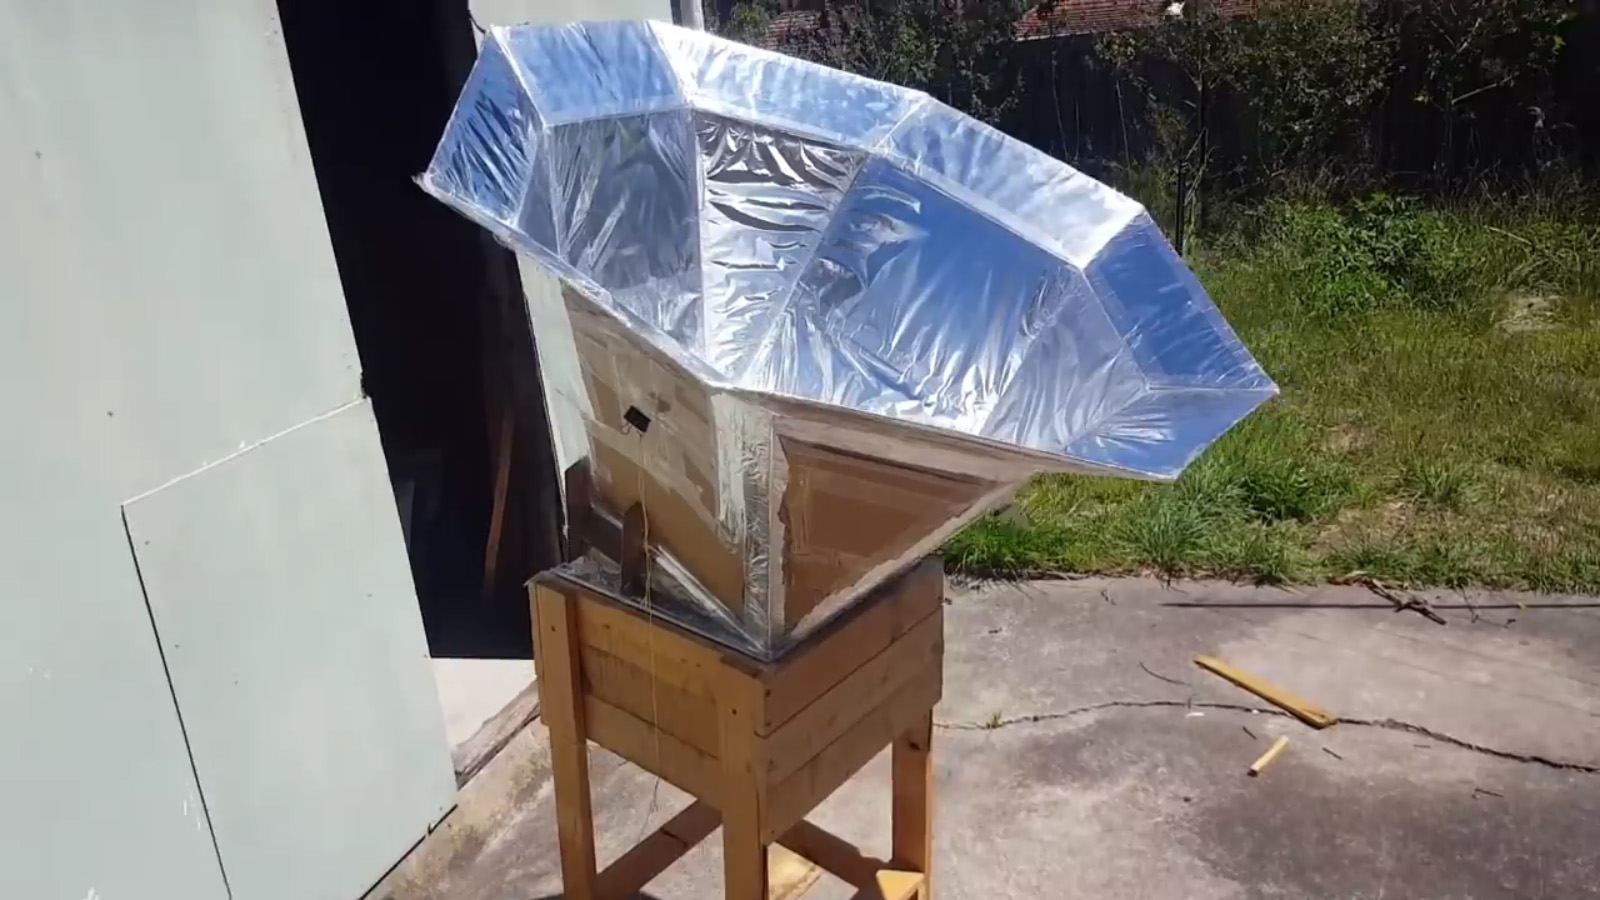 How to Make a Solar Oven With Aluminum Foil